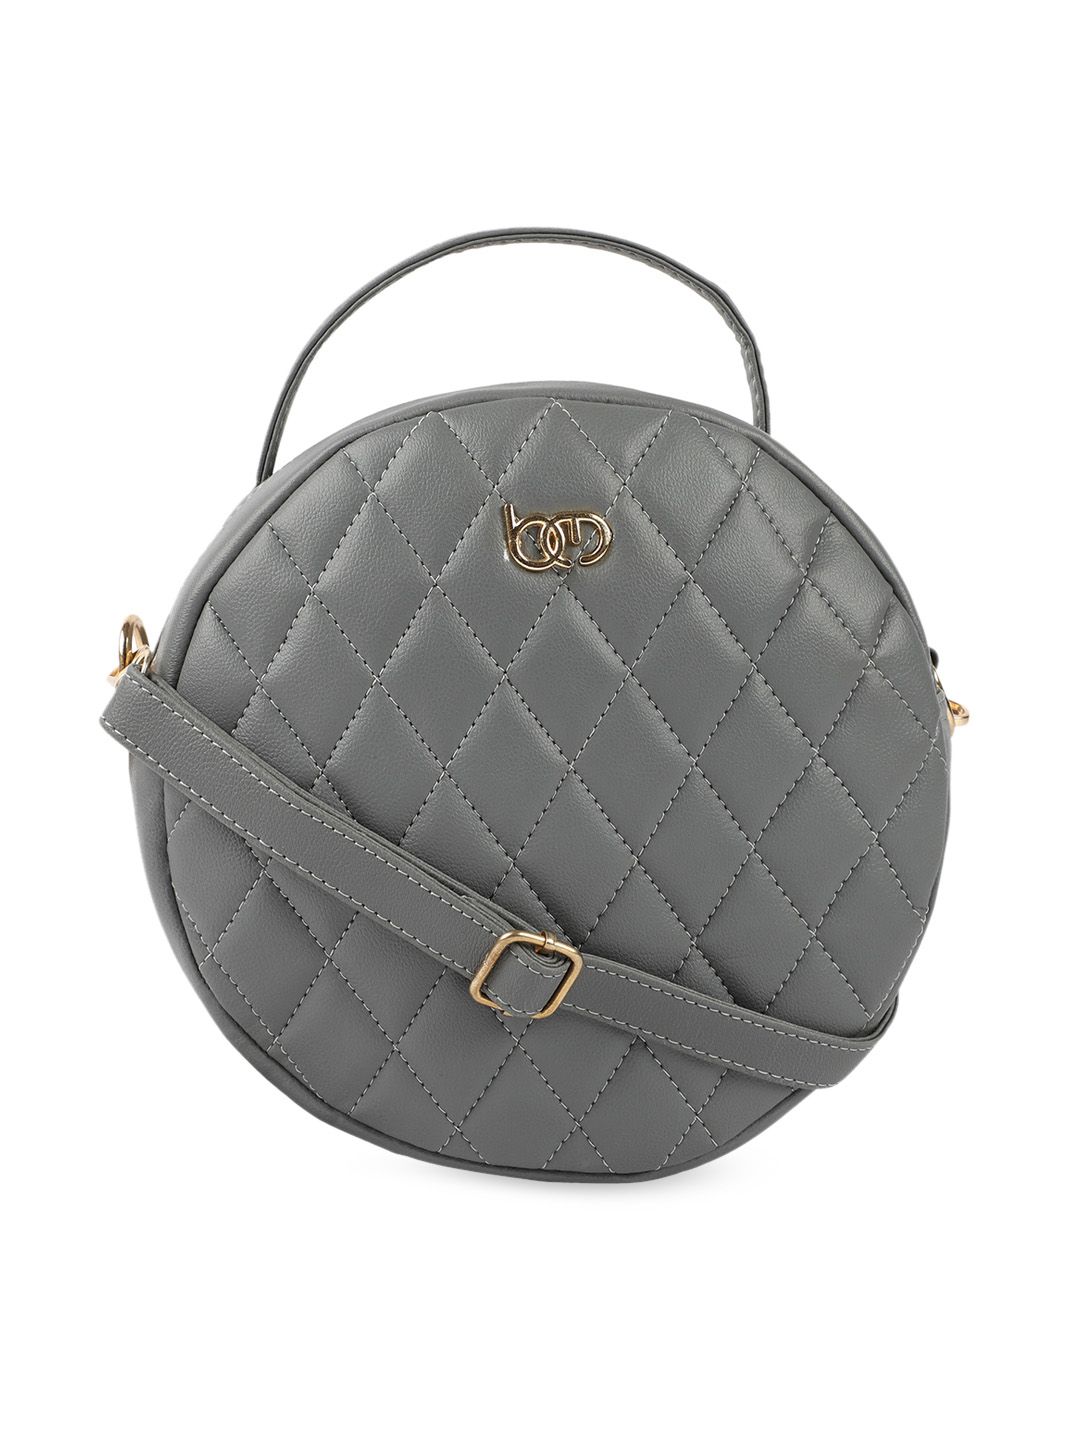 Bagsy Malone Grey Textured Sling Bag Price in India